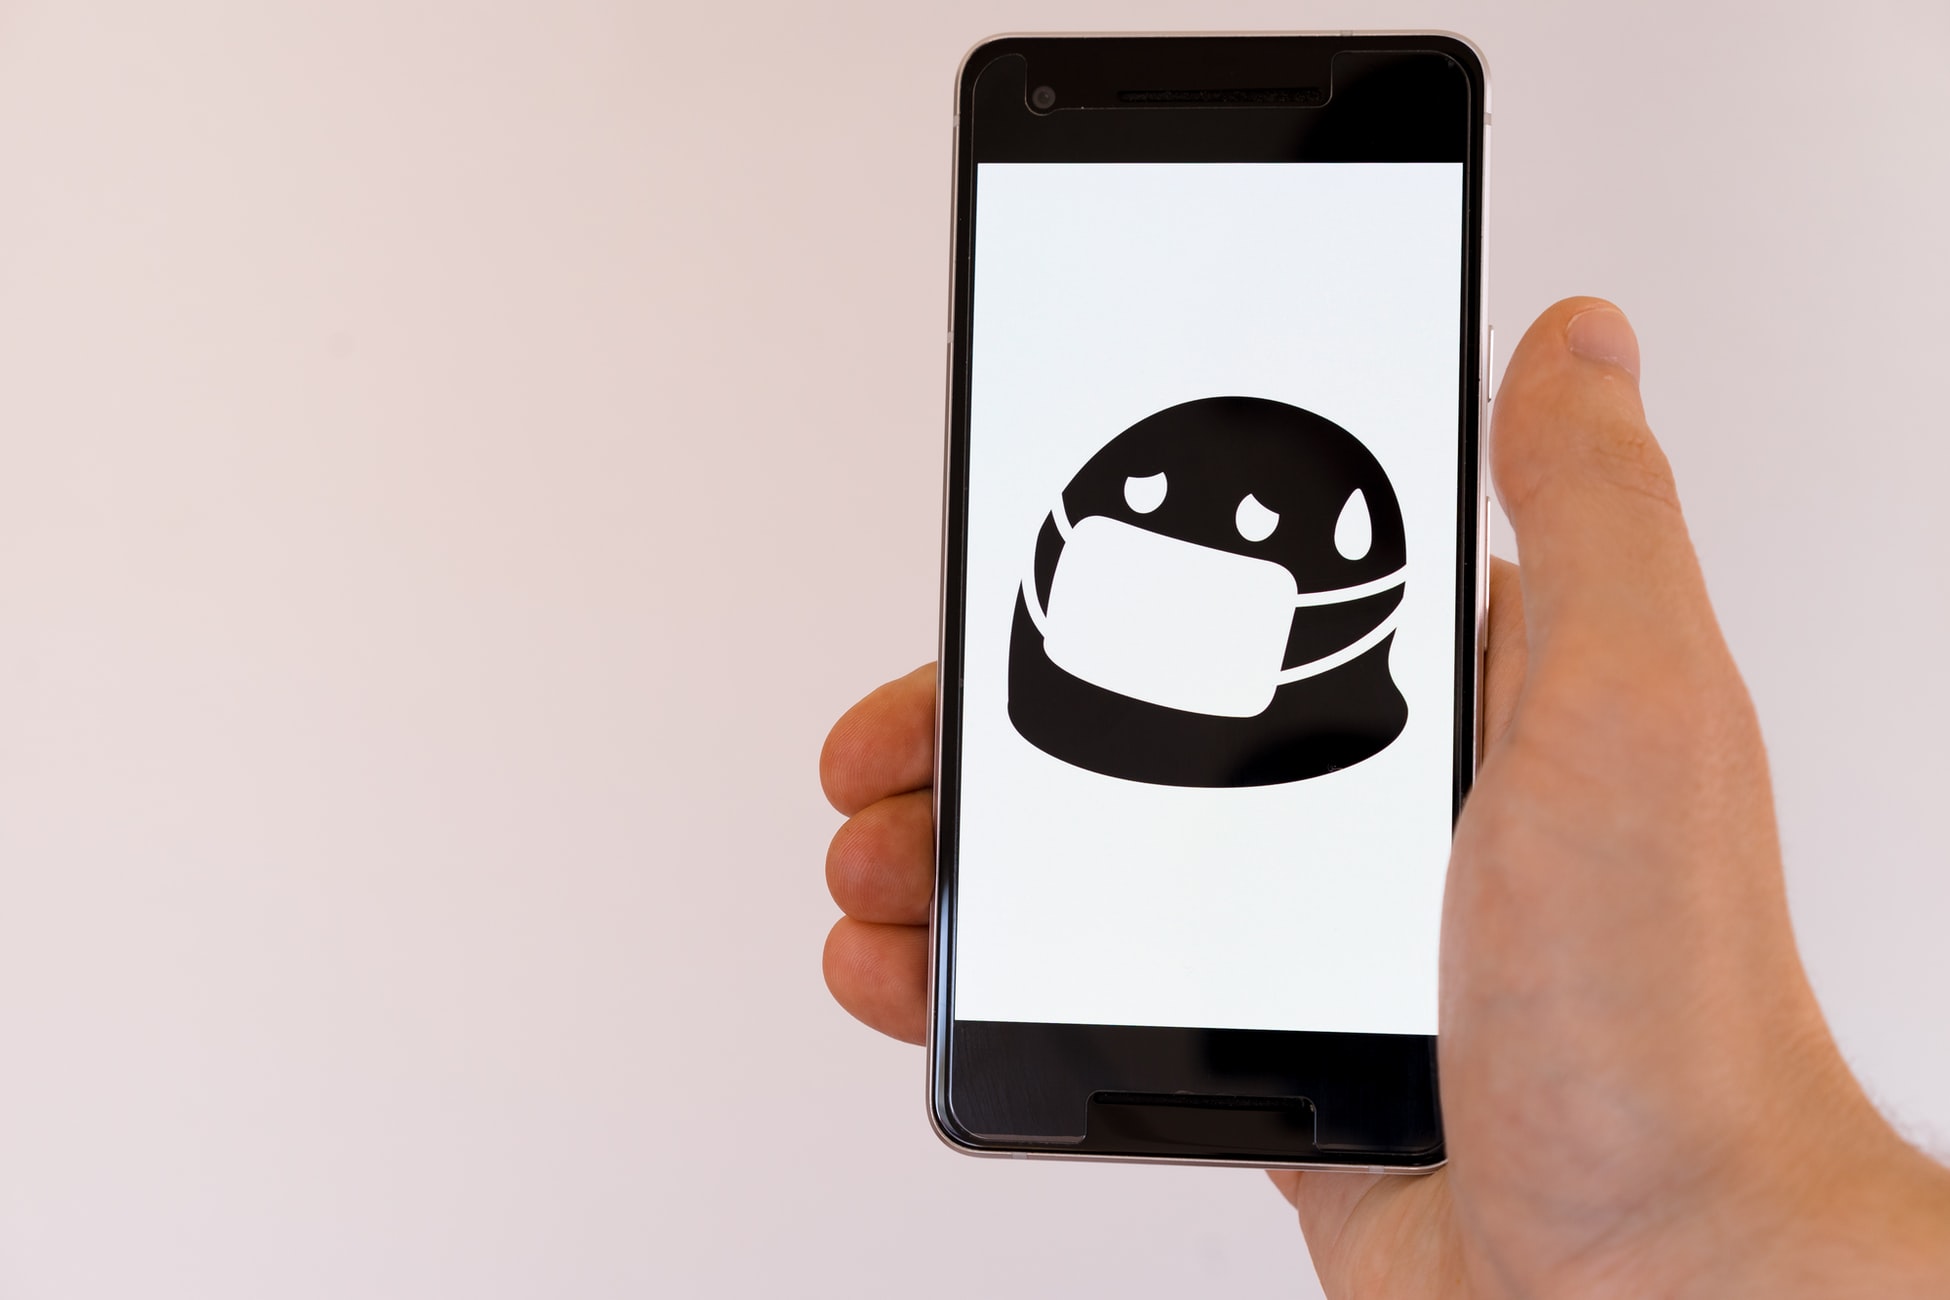 Shows a hand holding a mobile phone. The screen display is a cartoon face wearing a face mask